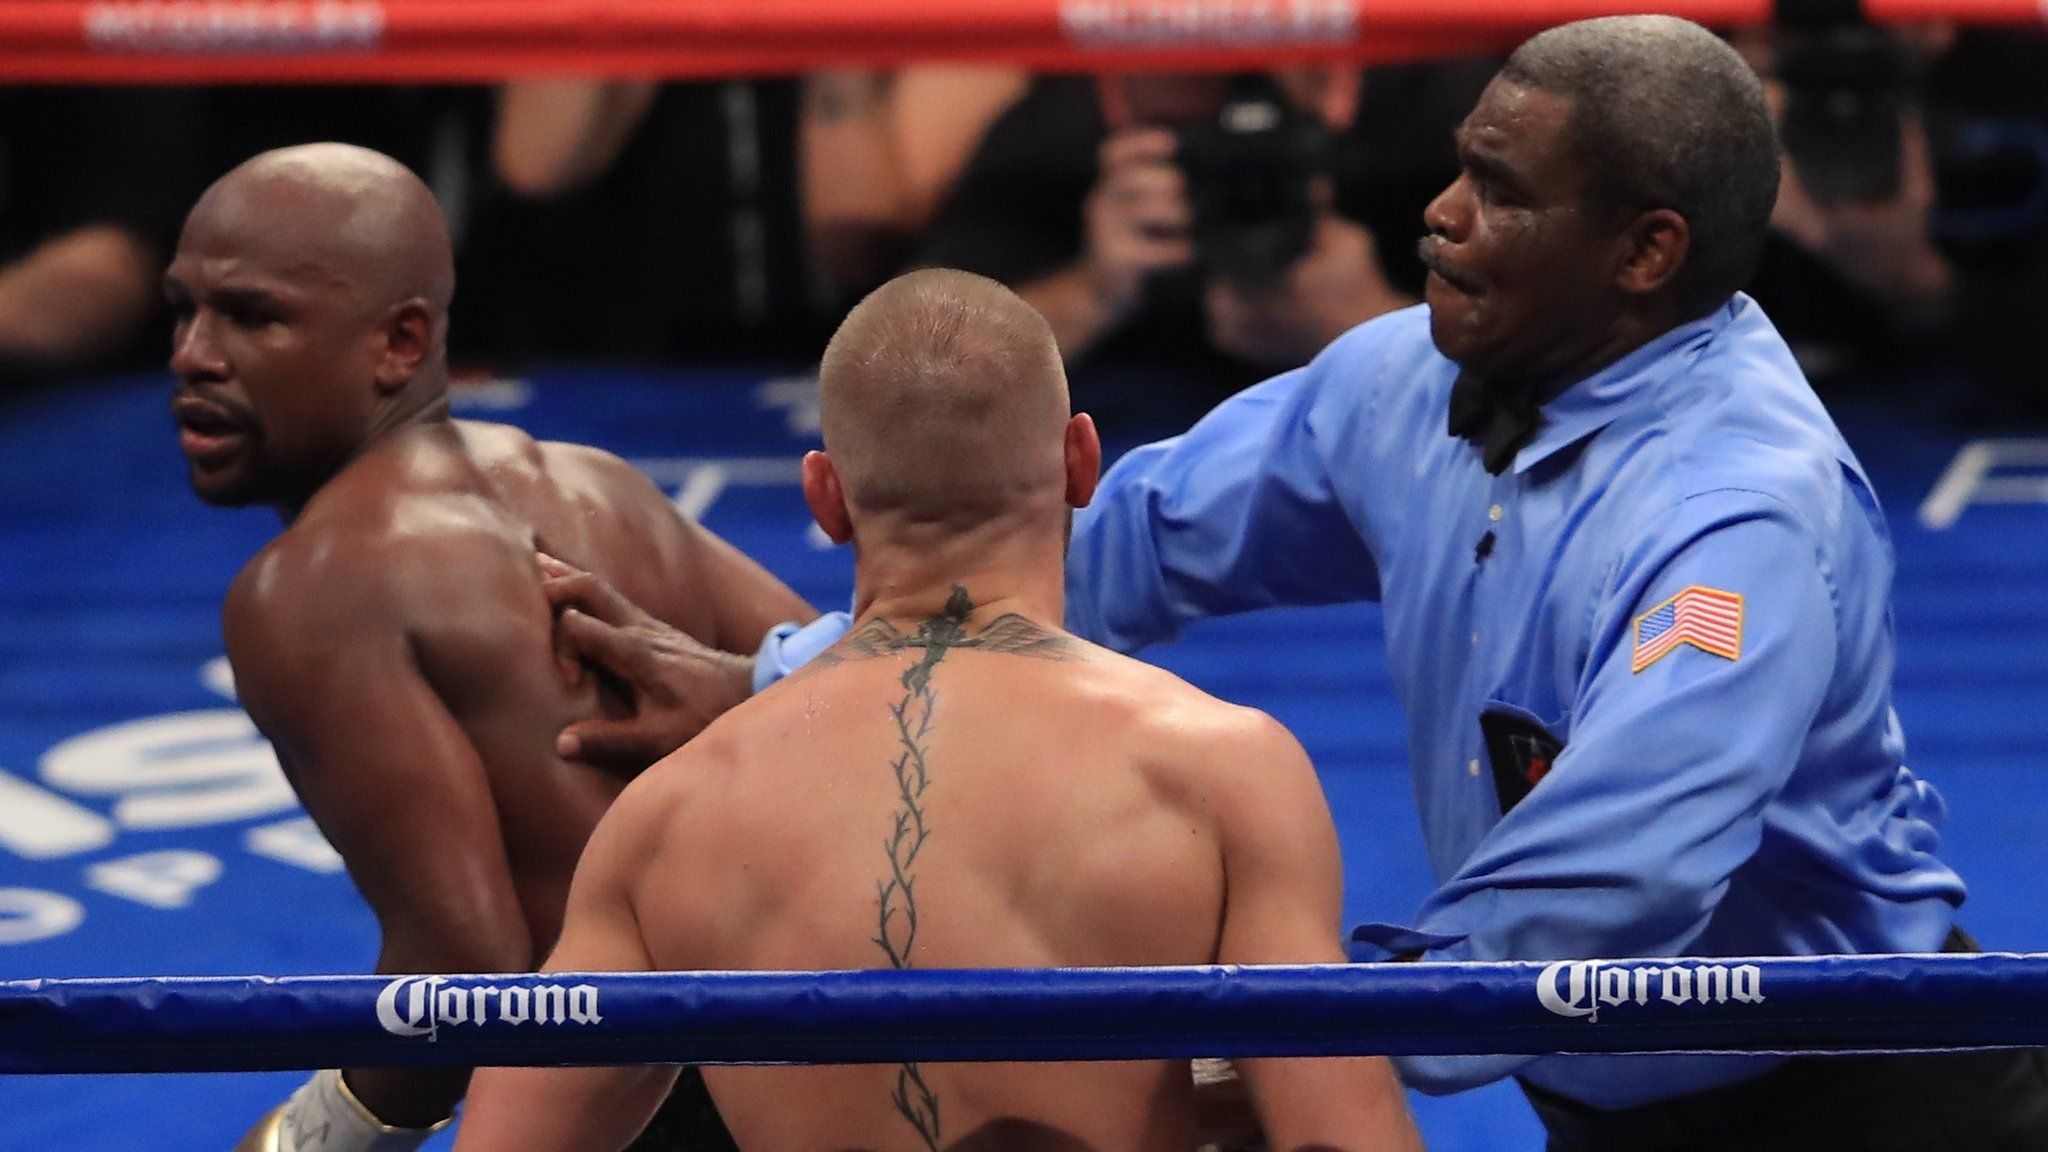 Ref stops fight and declares Mayweather the winner